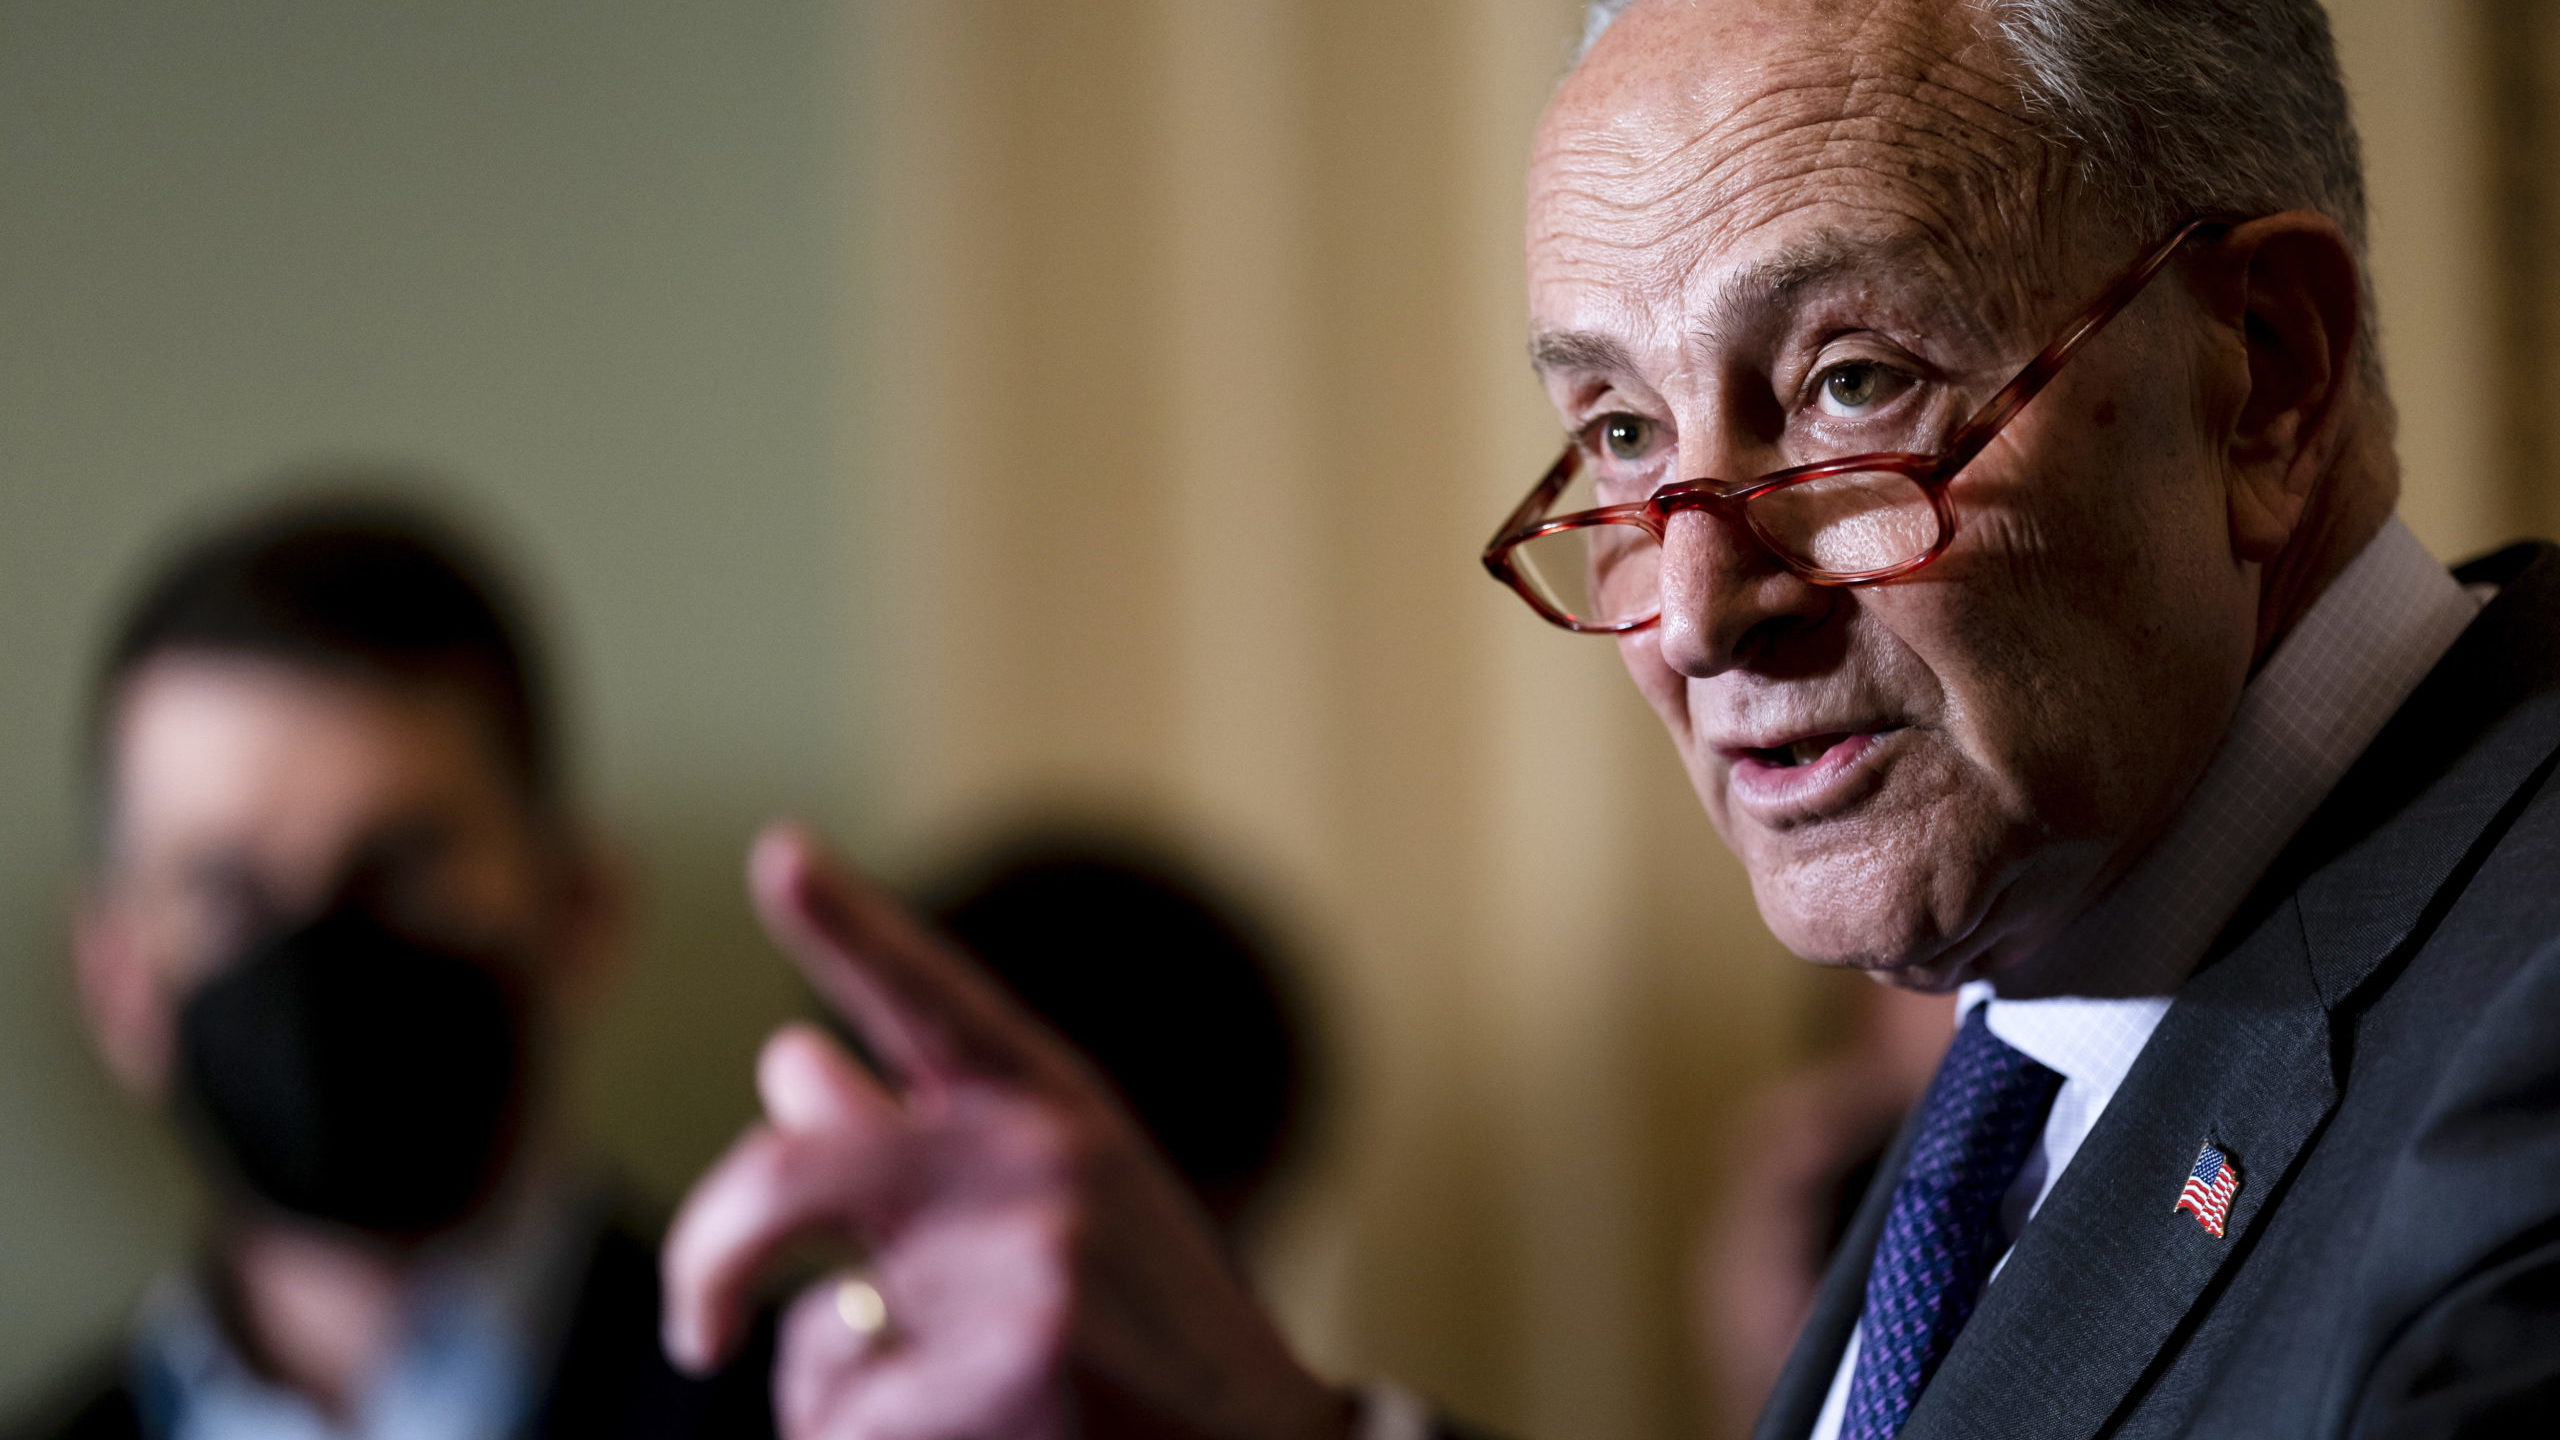 Senate Majority Leader Chuck Schumer, D-N.Y., meets with reporters at the Capitol in Washington, We...